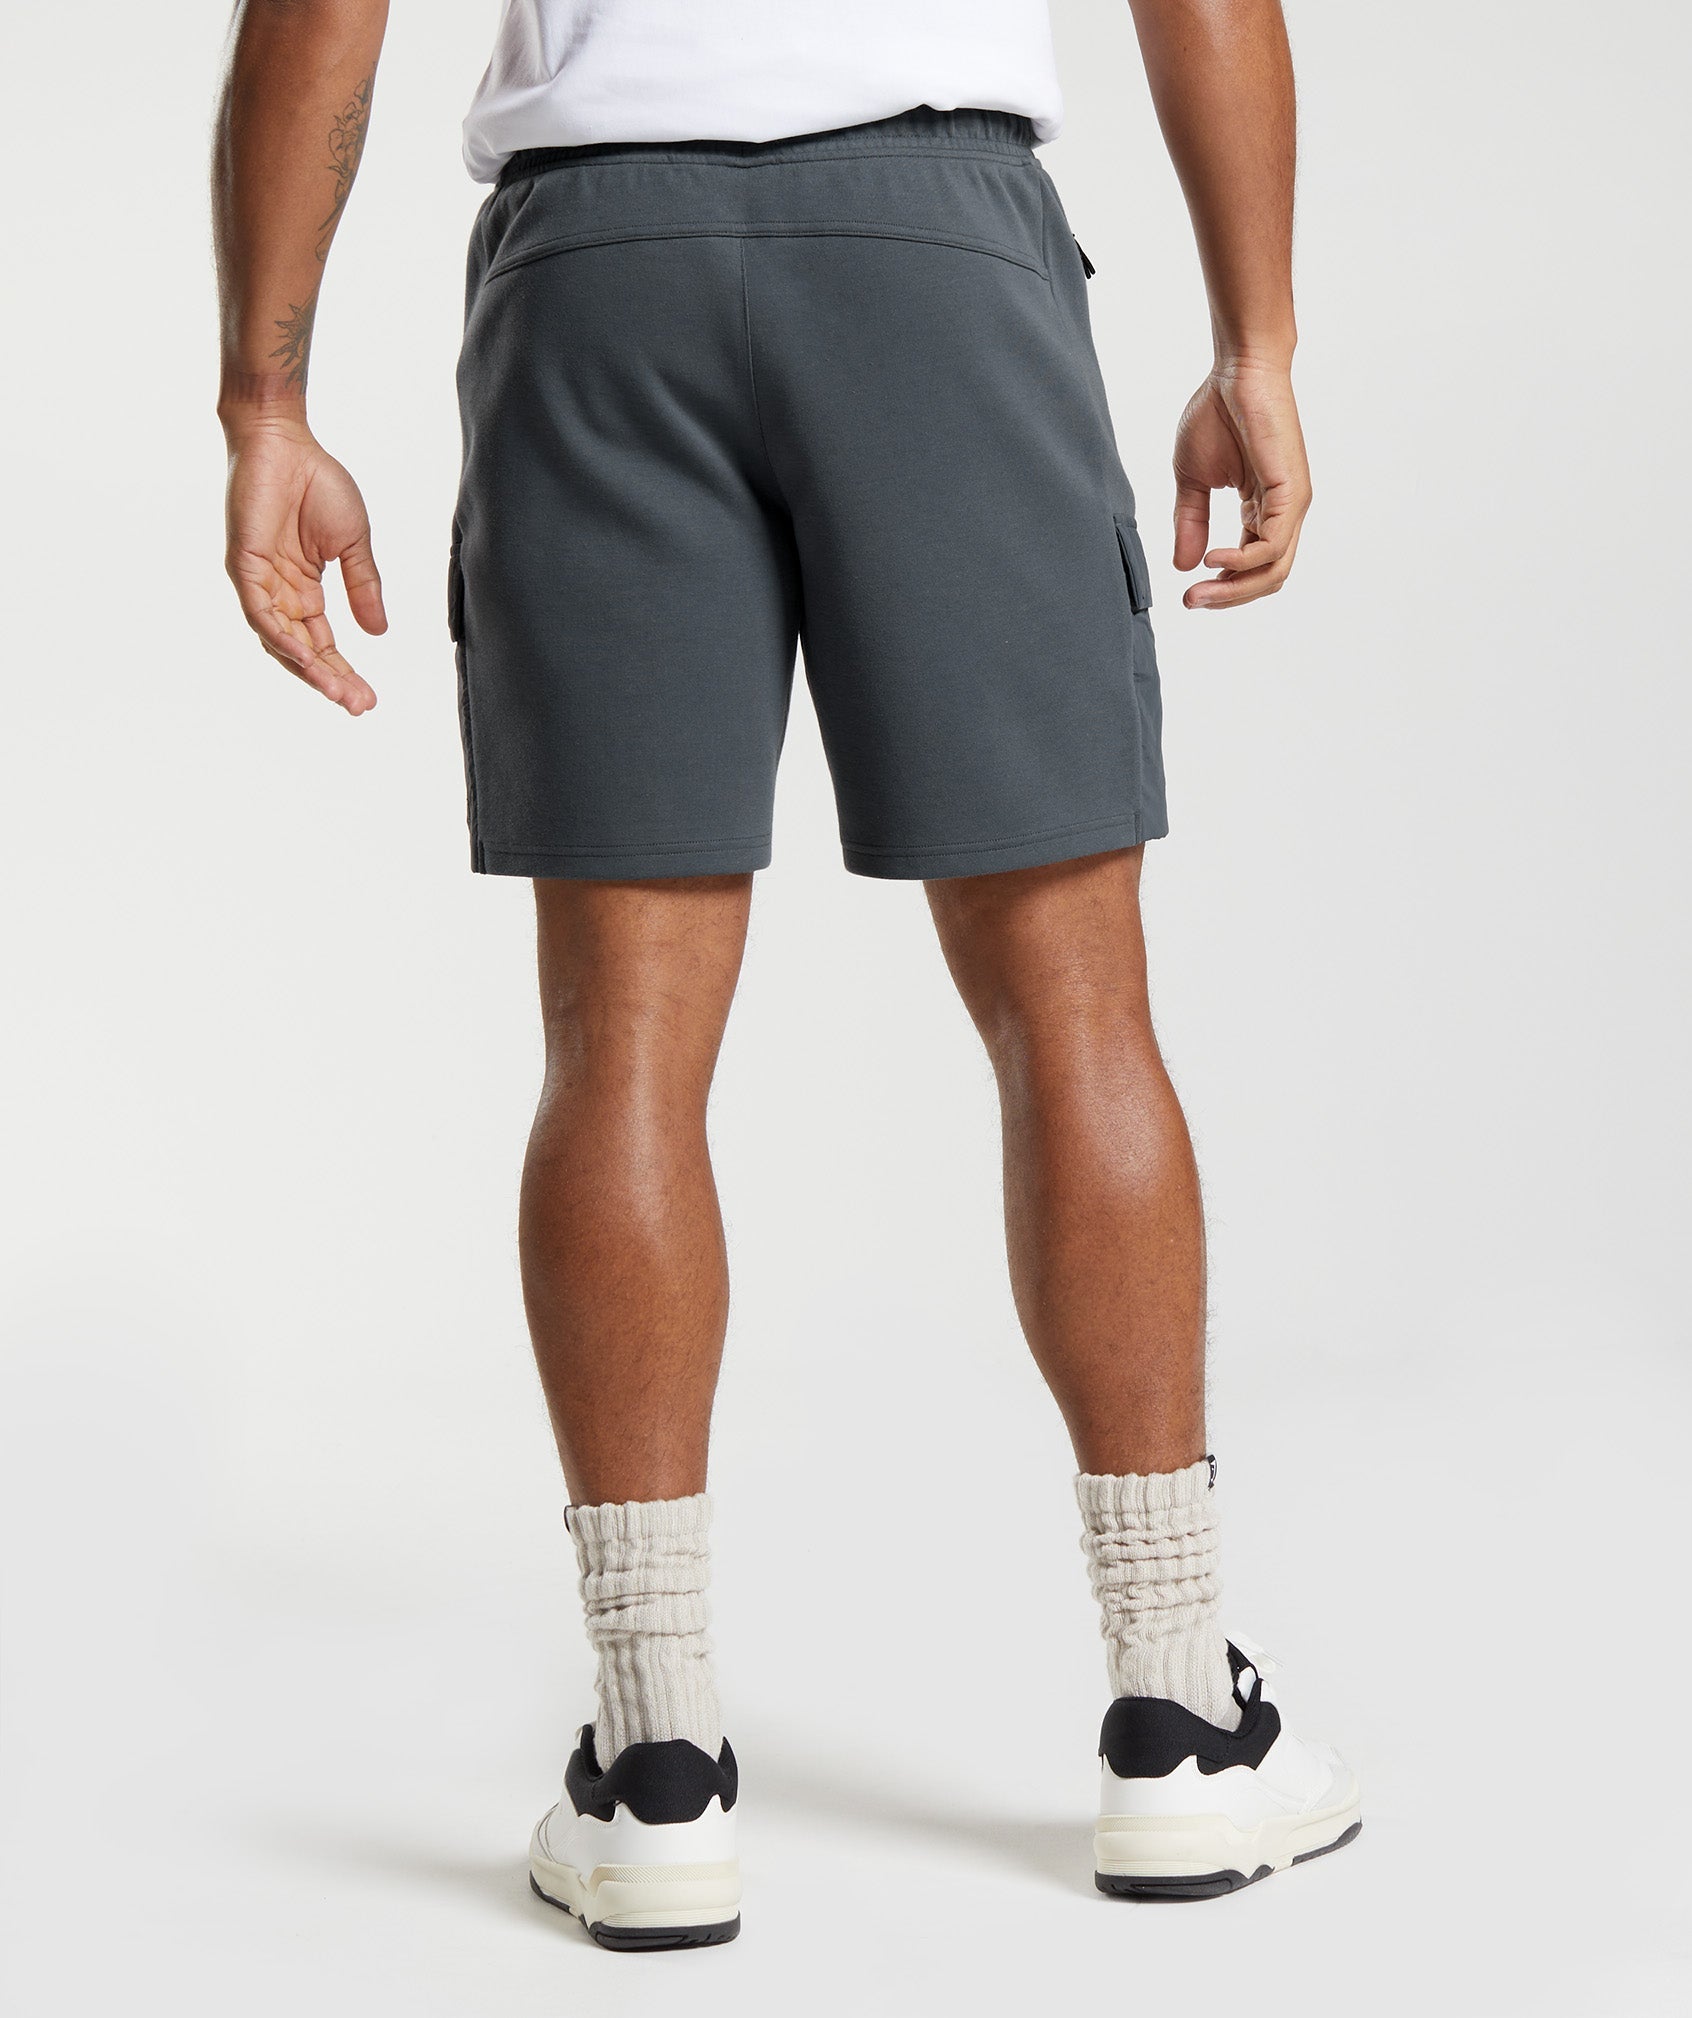 Rest Day Commute Shorts